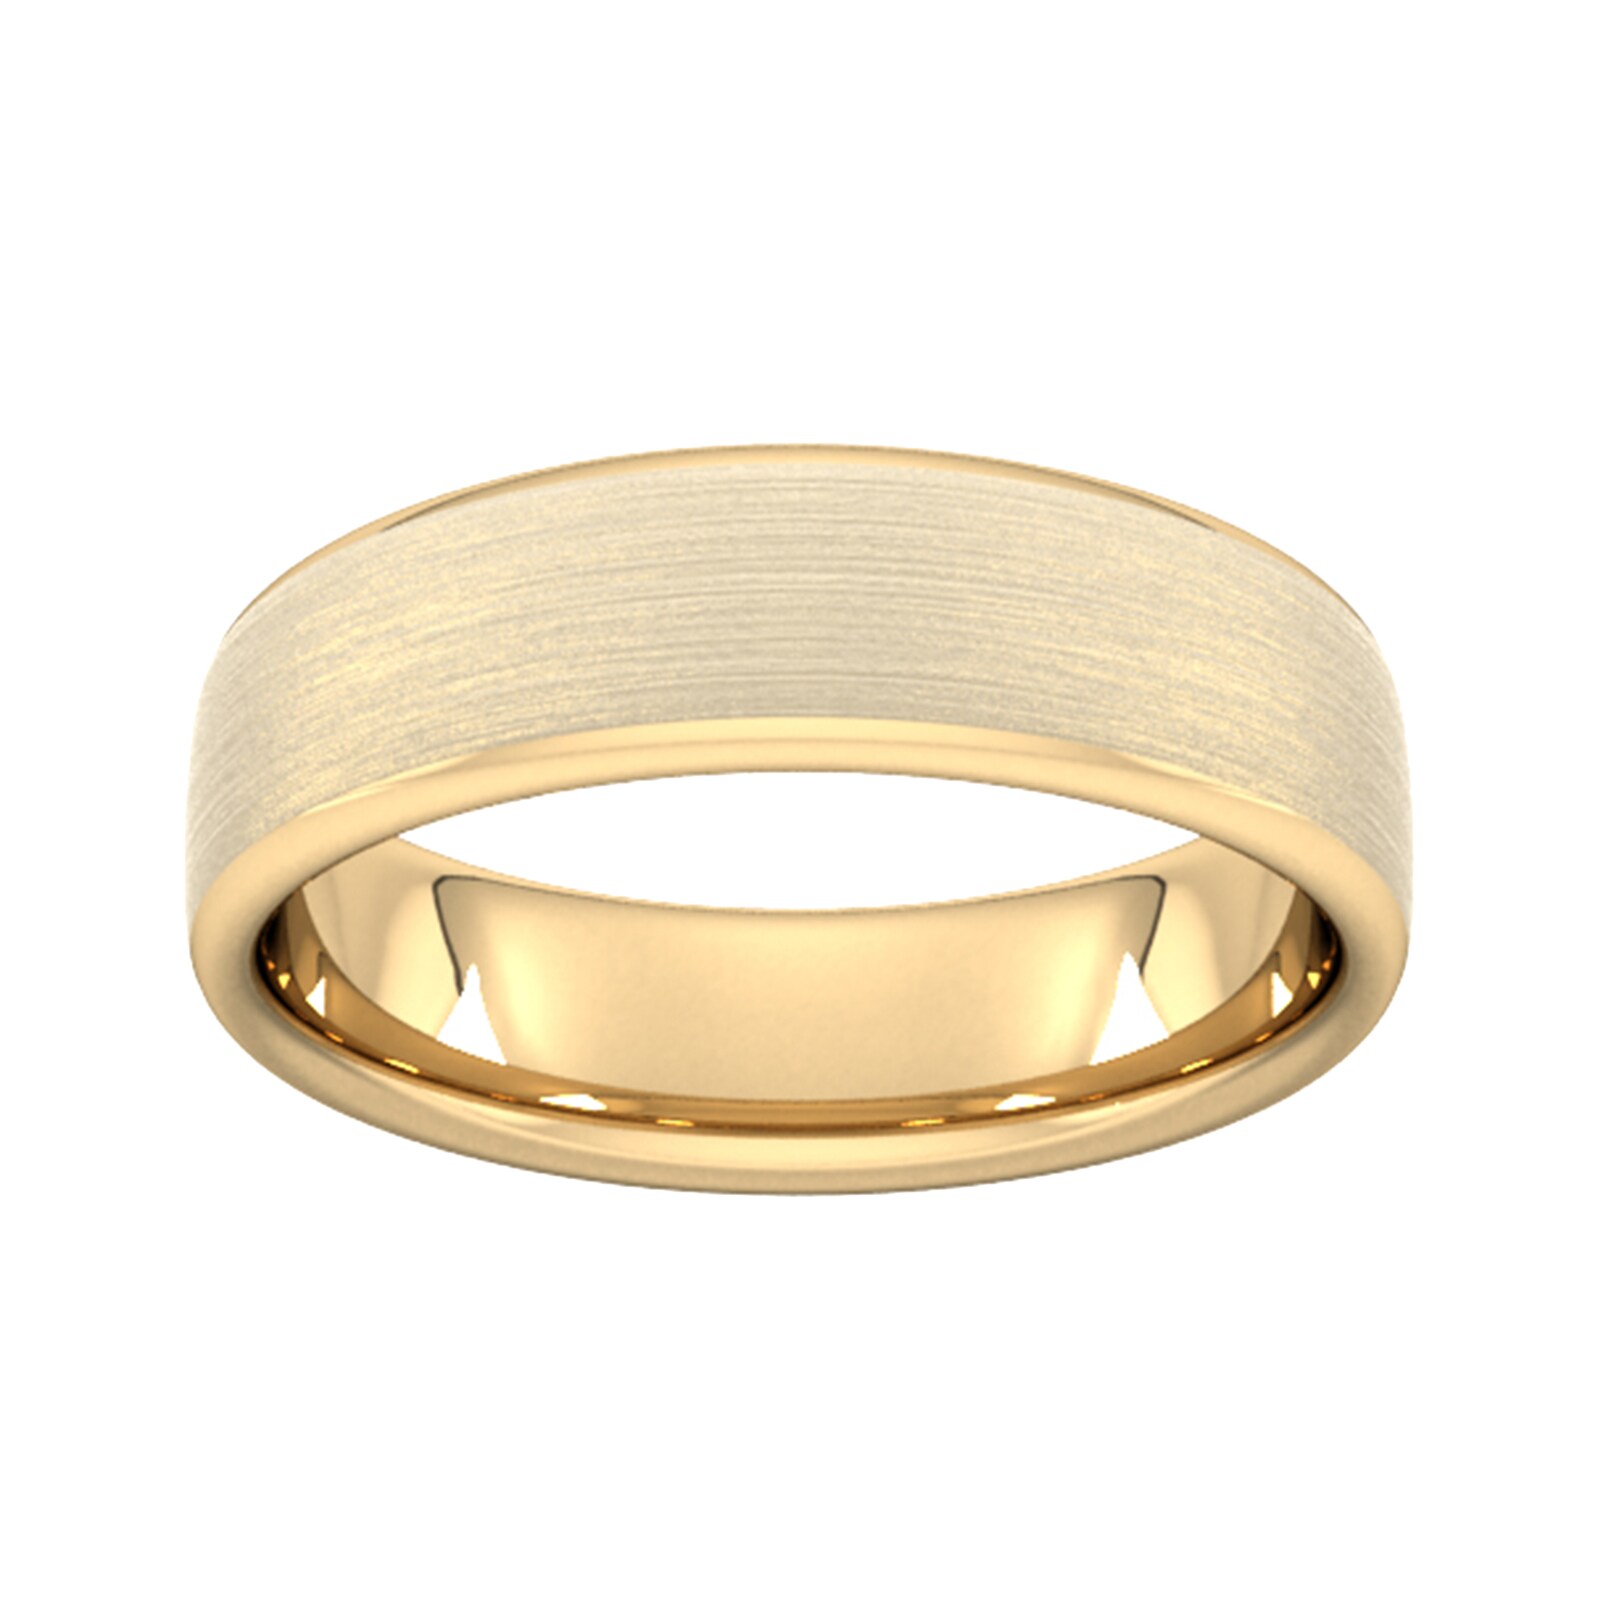 6mm Flat Court Heavy Matt Finished Wedding Ring In 18 Carat Yellow Gold - Ring Size S